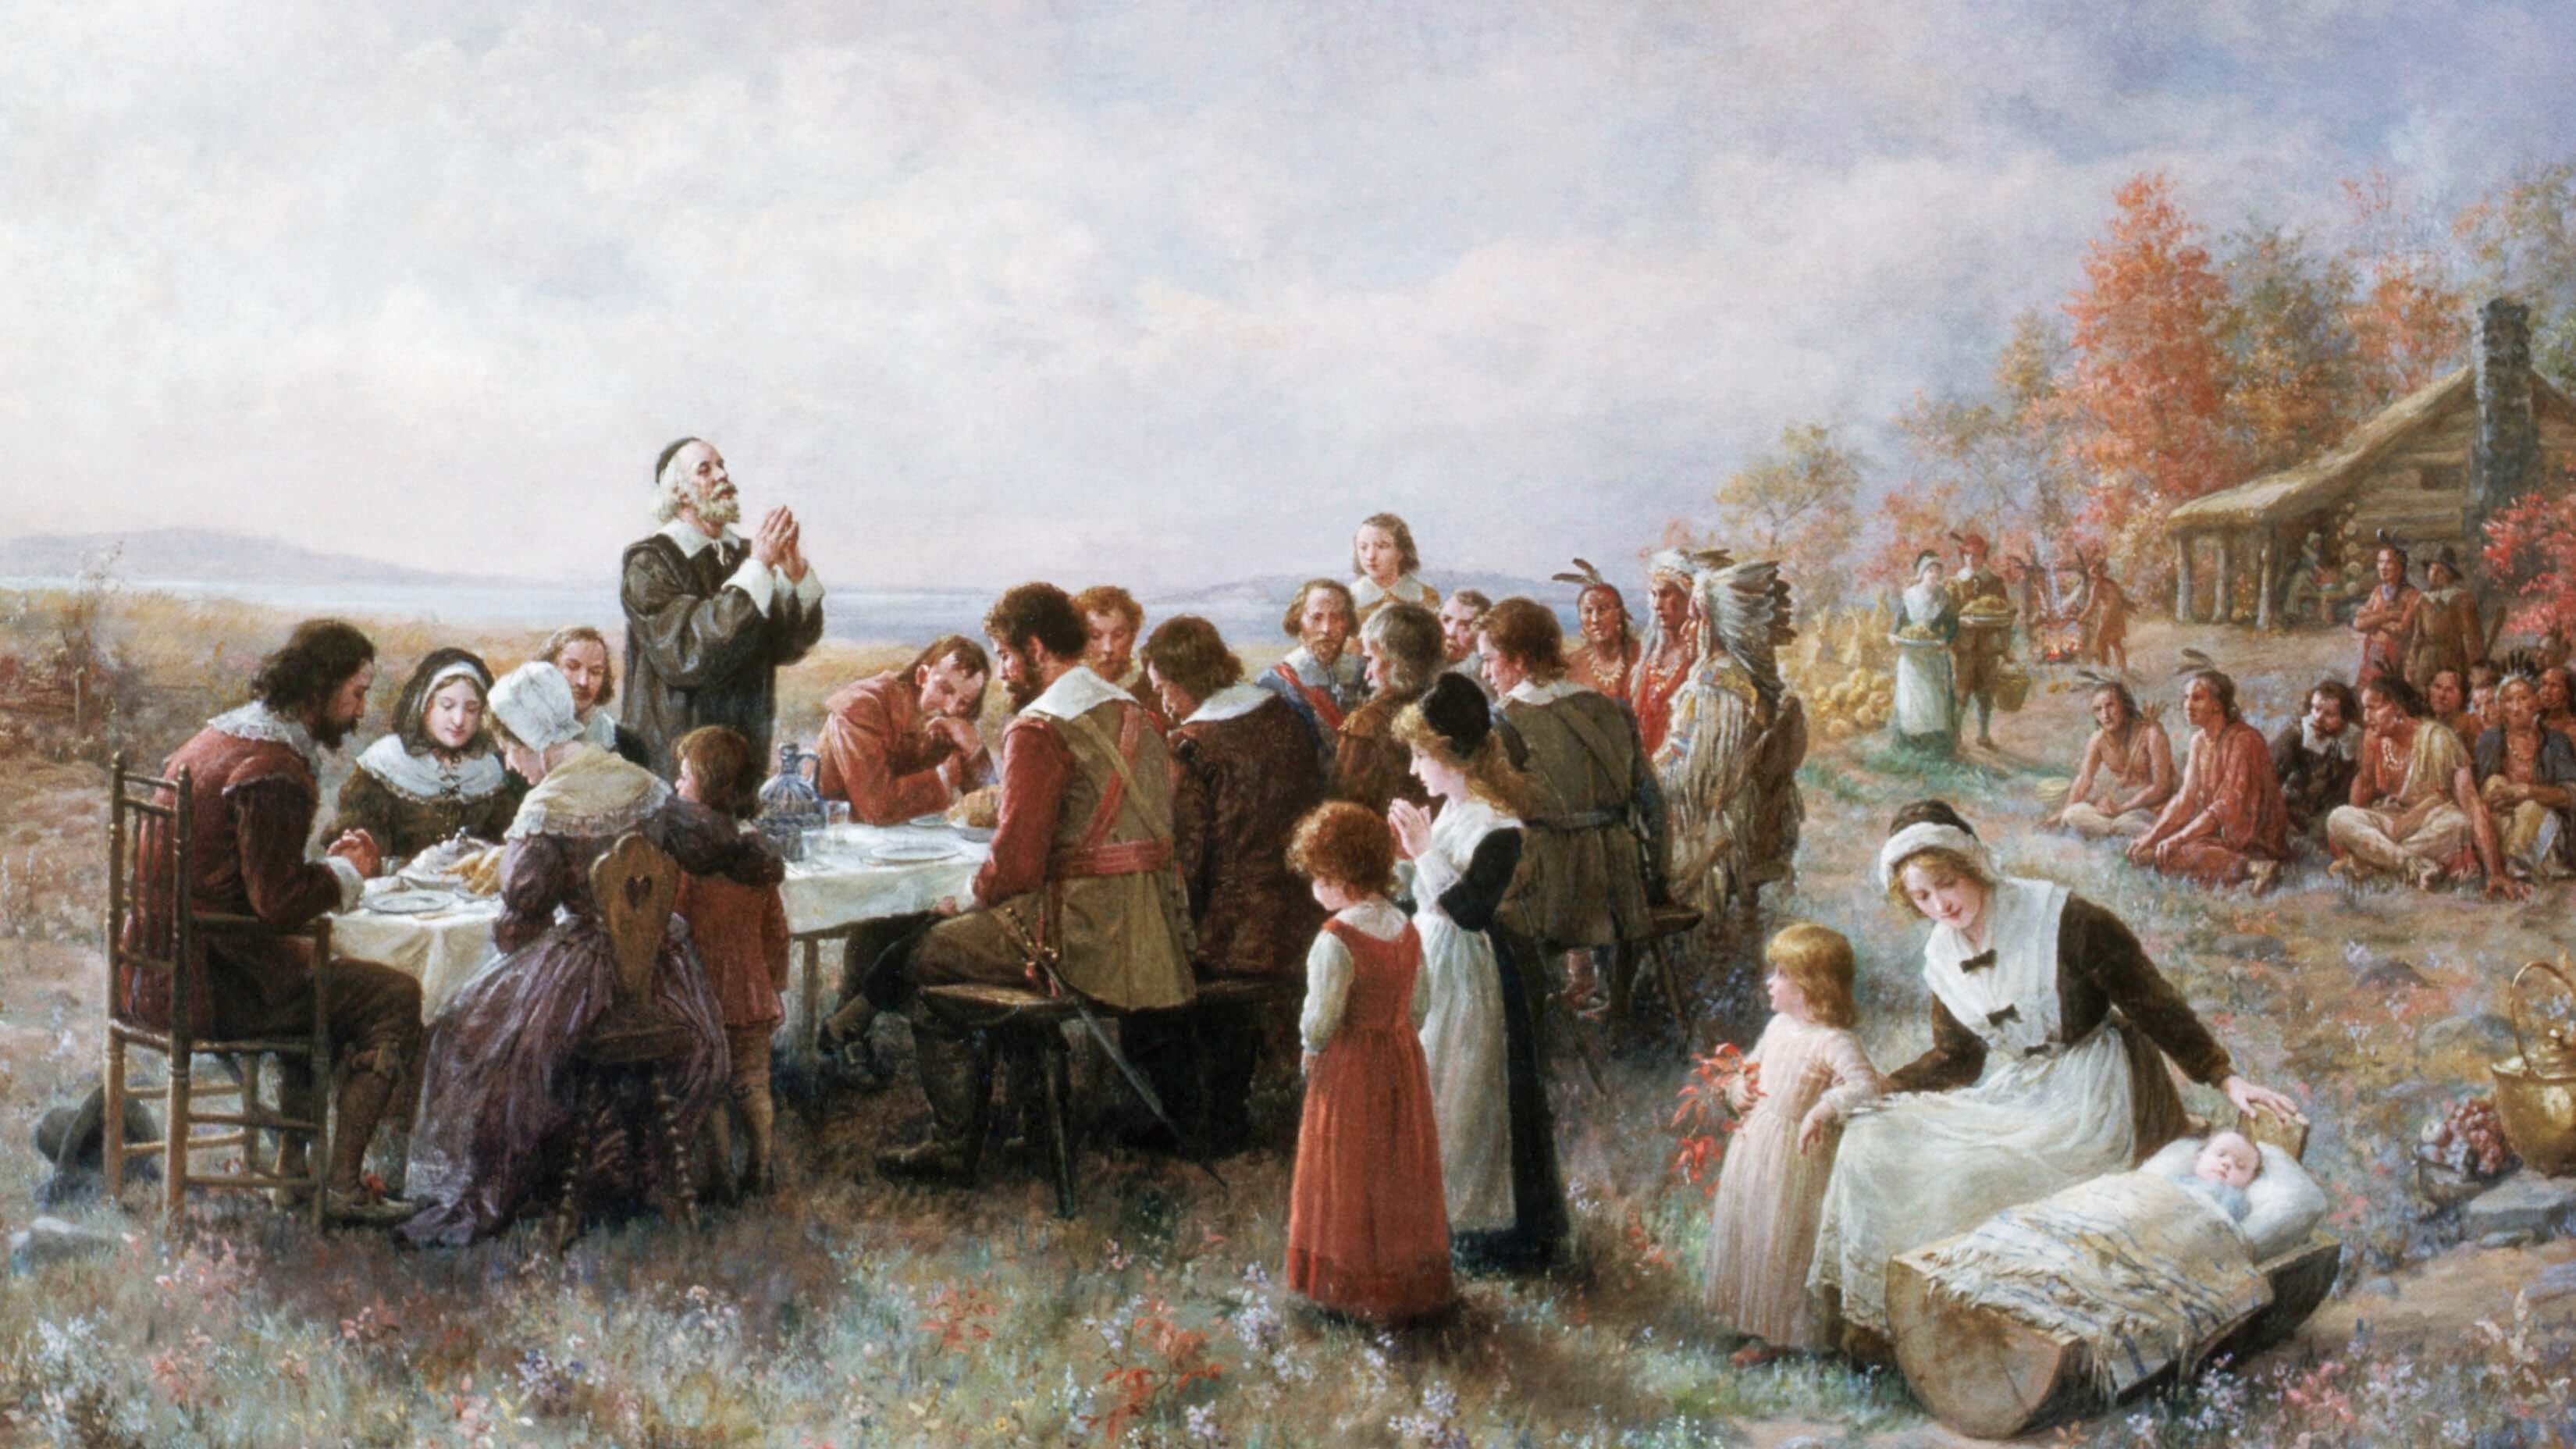 Historical depiction of the first Thanksgiving